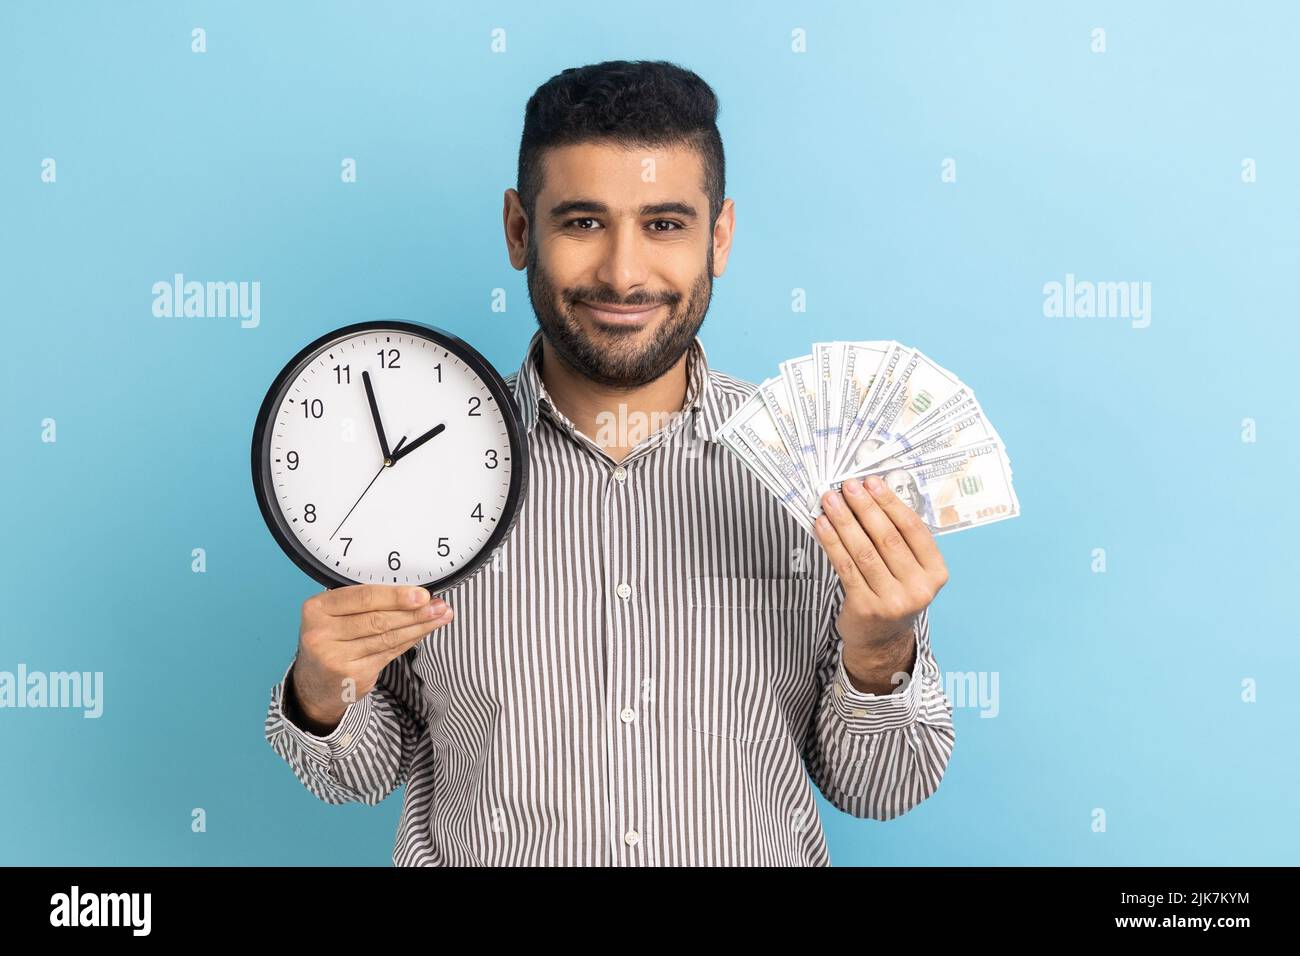 Positive handsome bearded businessman holding big fan of dollar banknotes and wall clock, time is money, expressing happiness, wearing striped shirt. Indoor studio shot isolated on blue background. Stock Photo